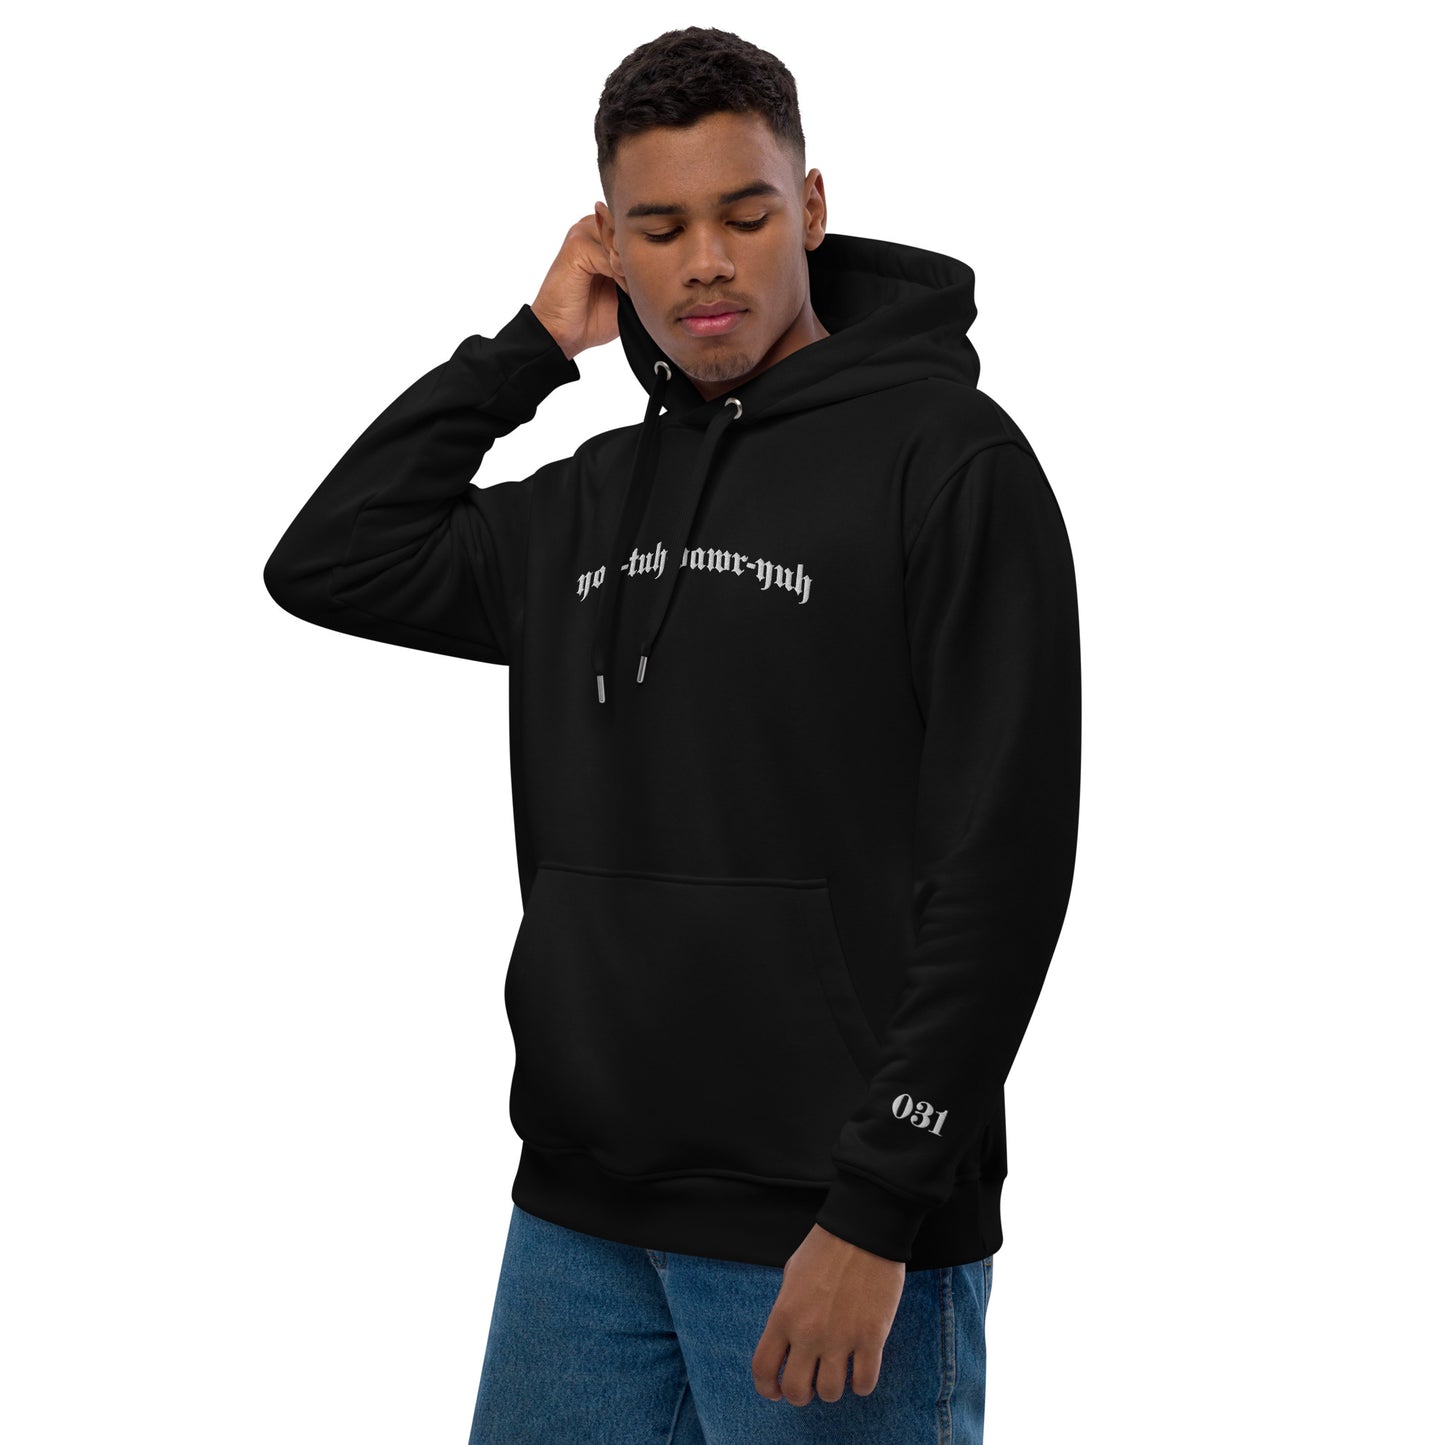 YŒ-TUH-BAWR-YUH 031 - Embroidered Premium eco hoodie